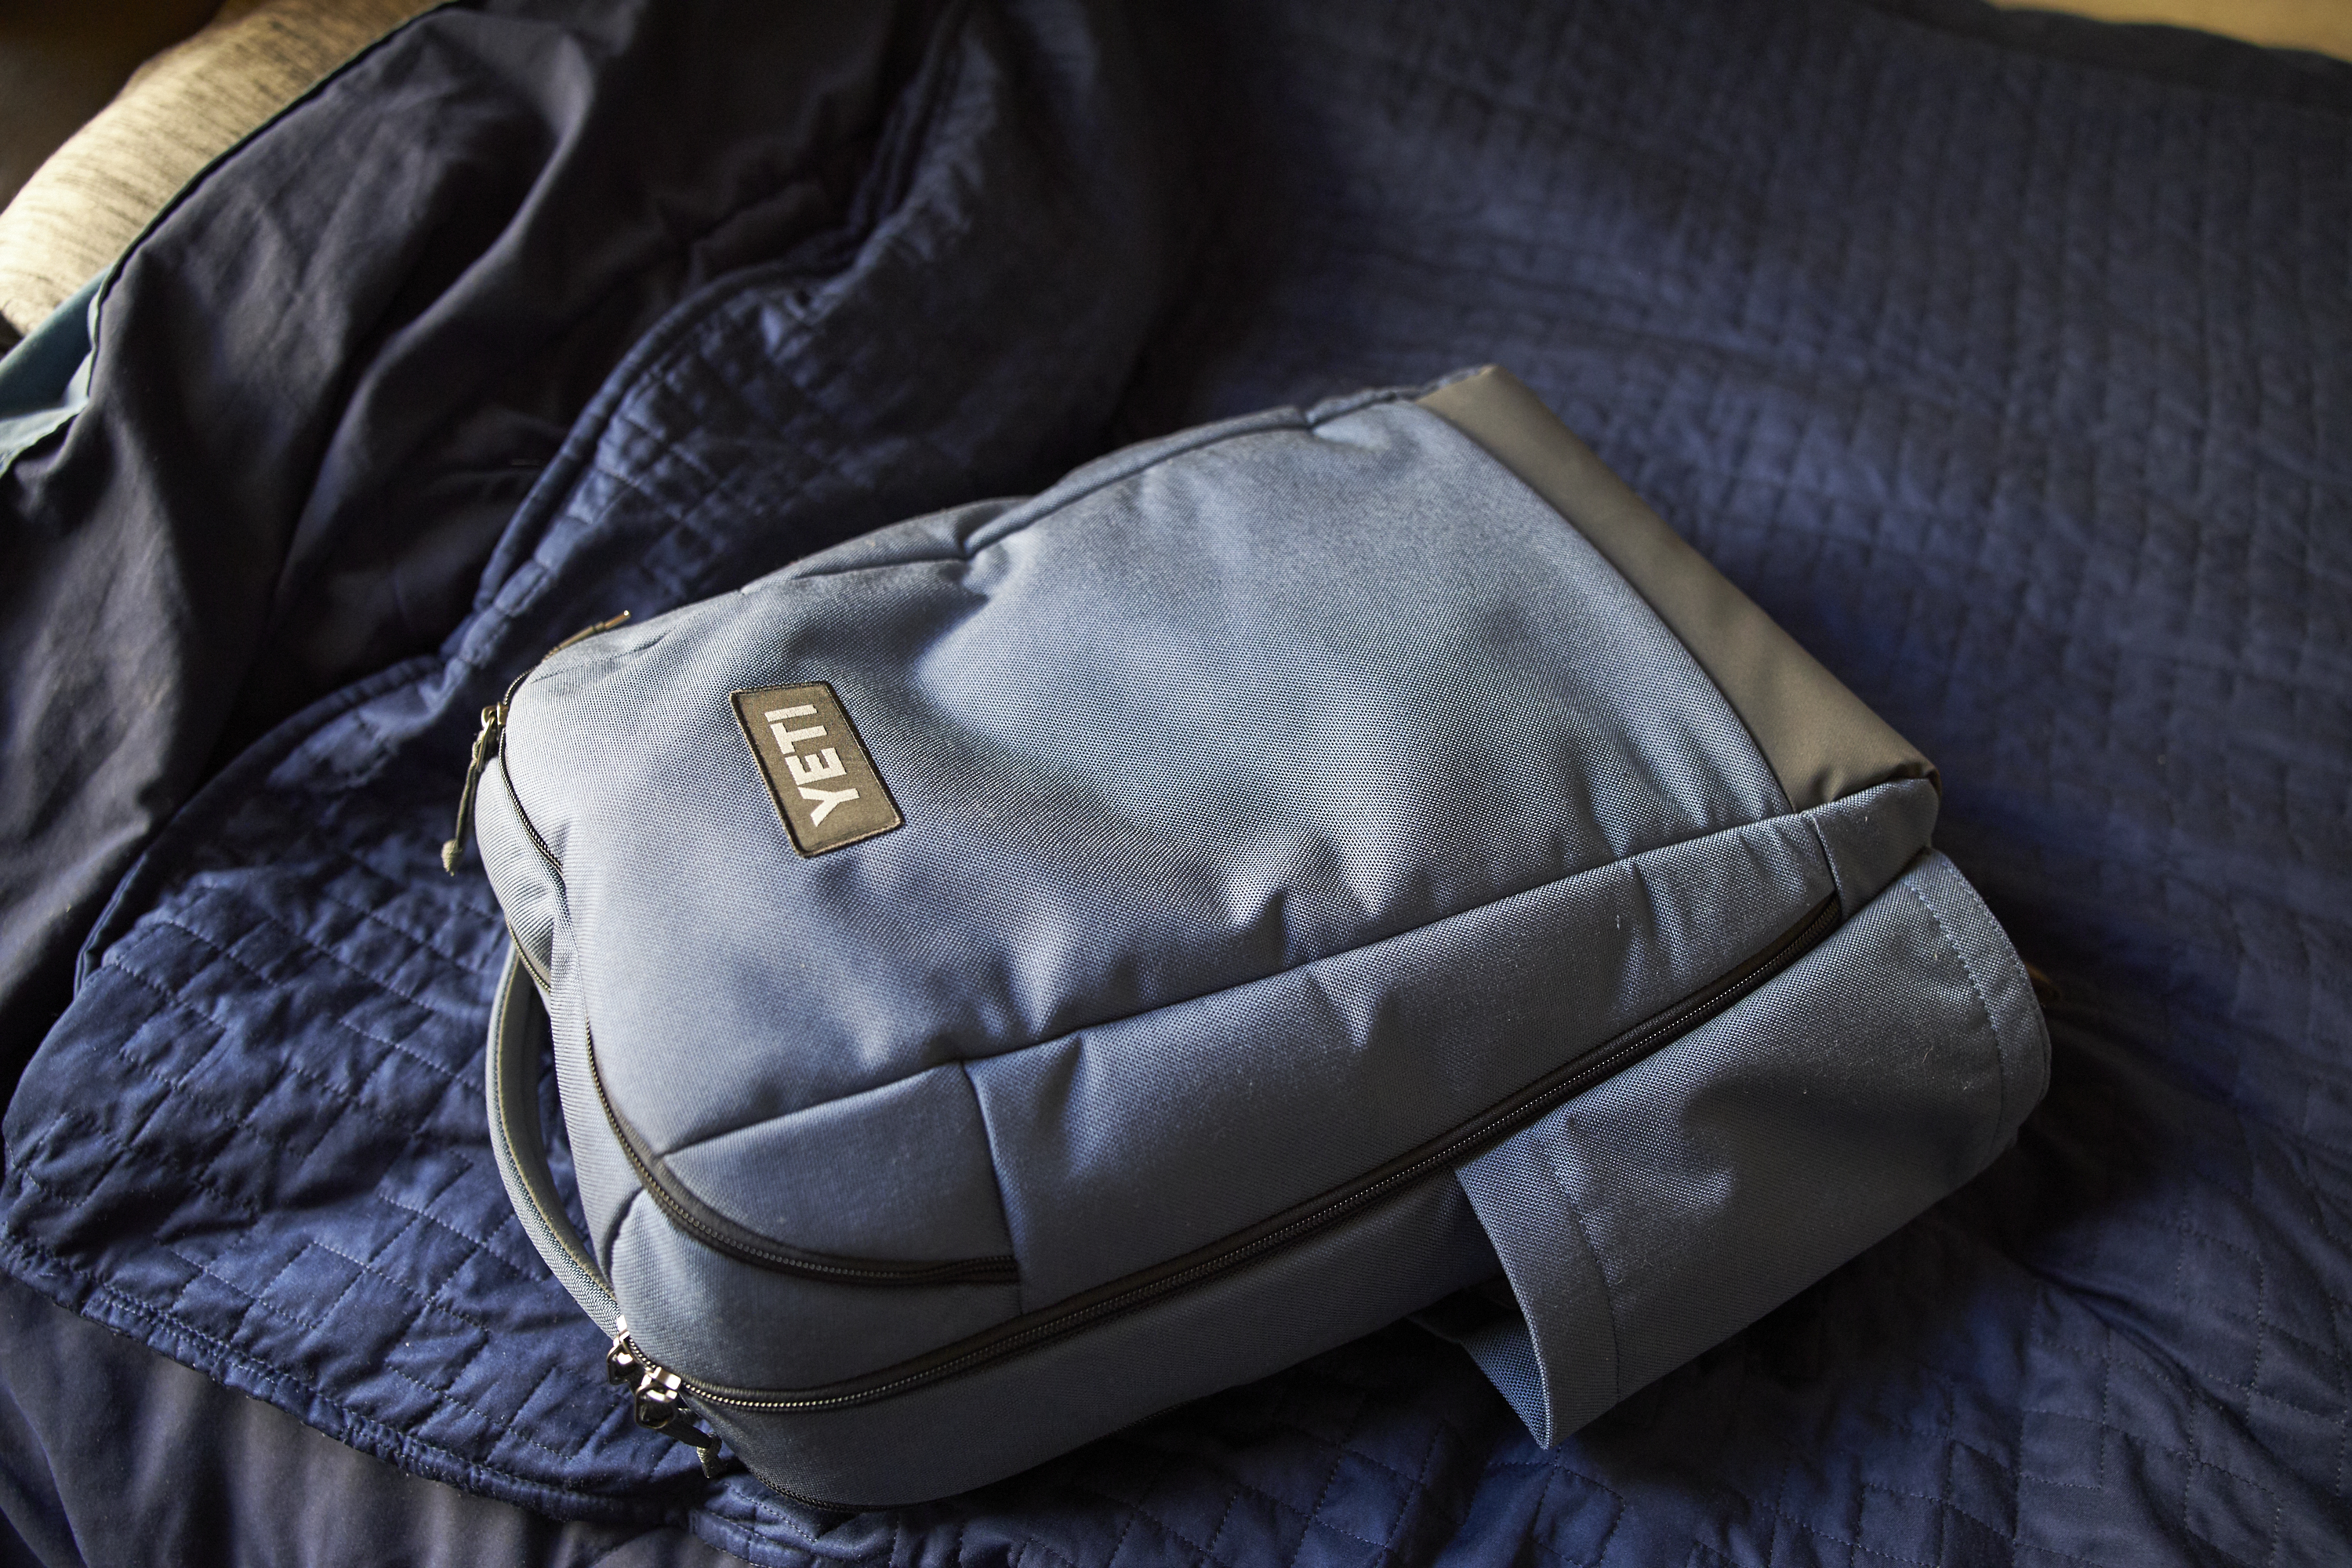 Meet YETI's New Travel Bags: The Crossroads Collection - InsideHook